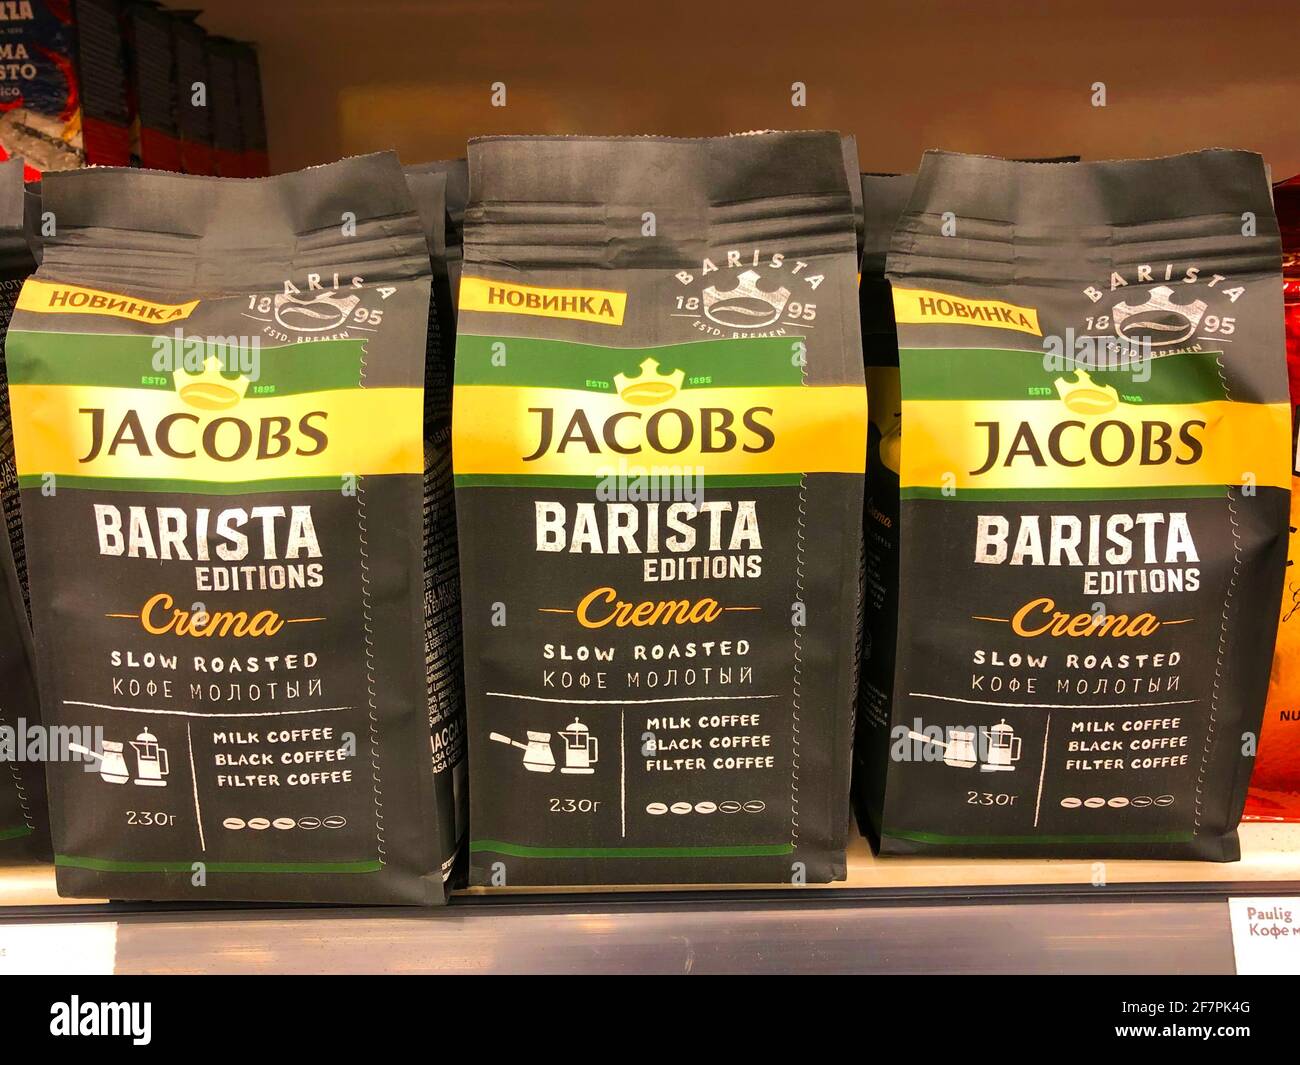 Jacobs Barista editions crema ground coffee, row of coffee in plastic bags  packing in a supermarket shelf close up, Russia, Saint-Petersburg. 08 april  Stock Photo - Alamy